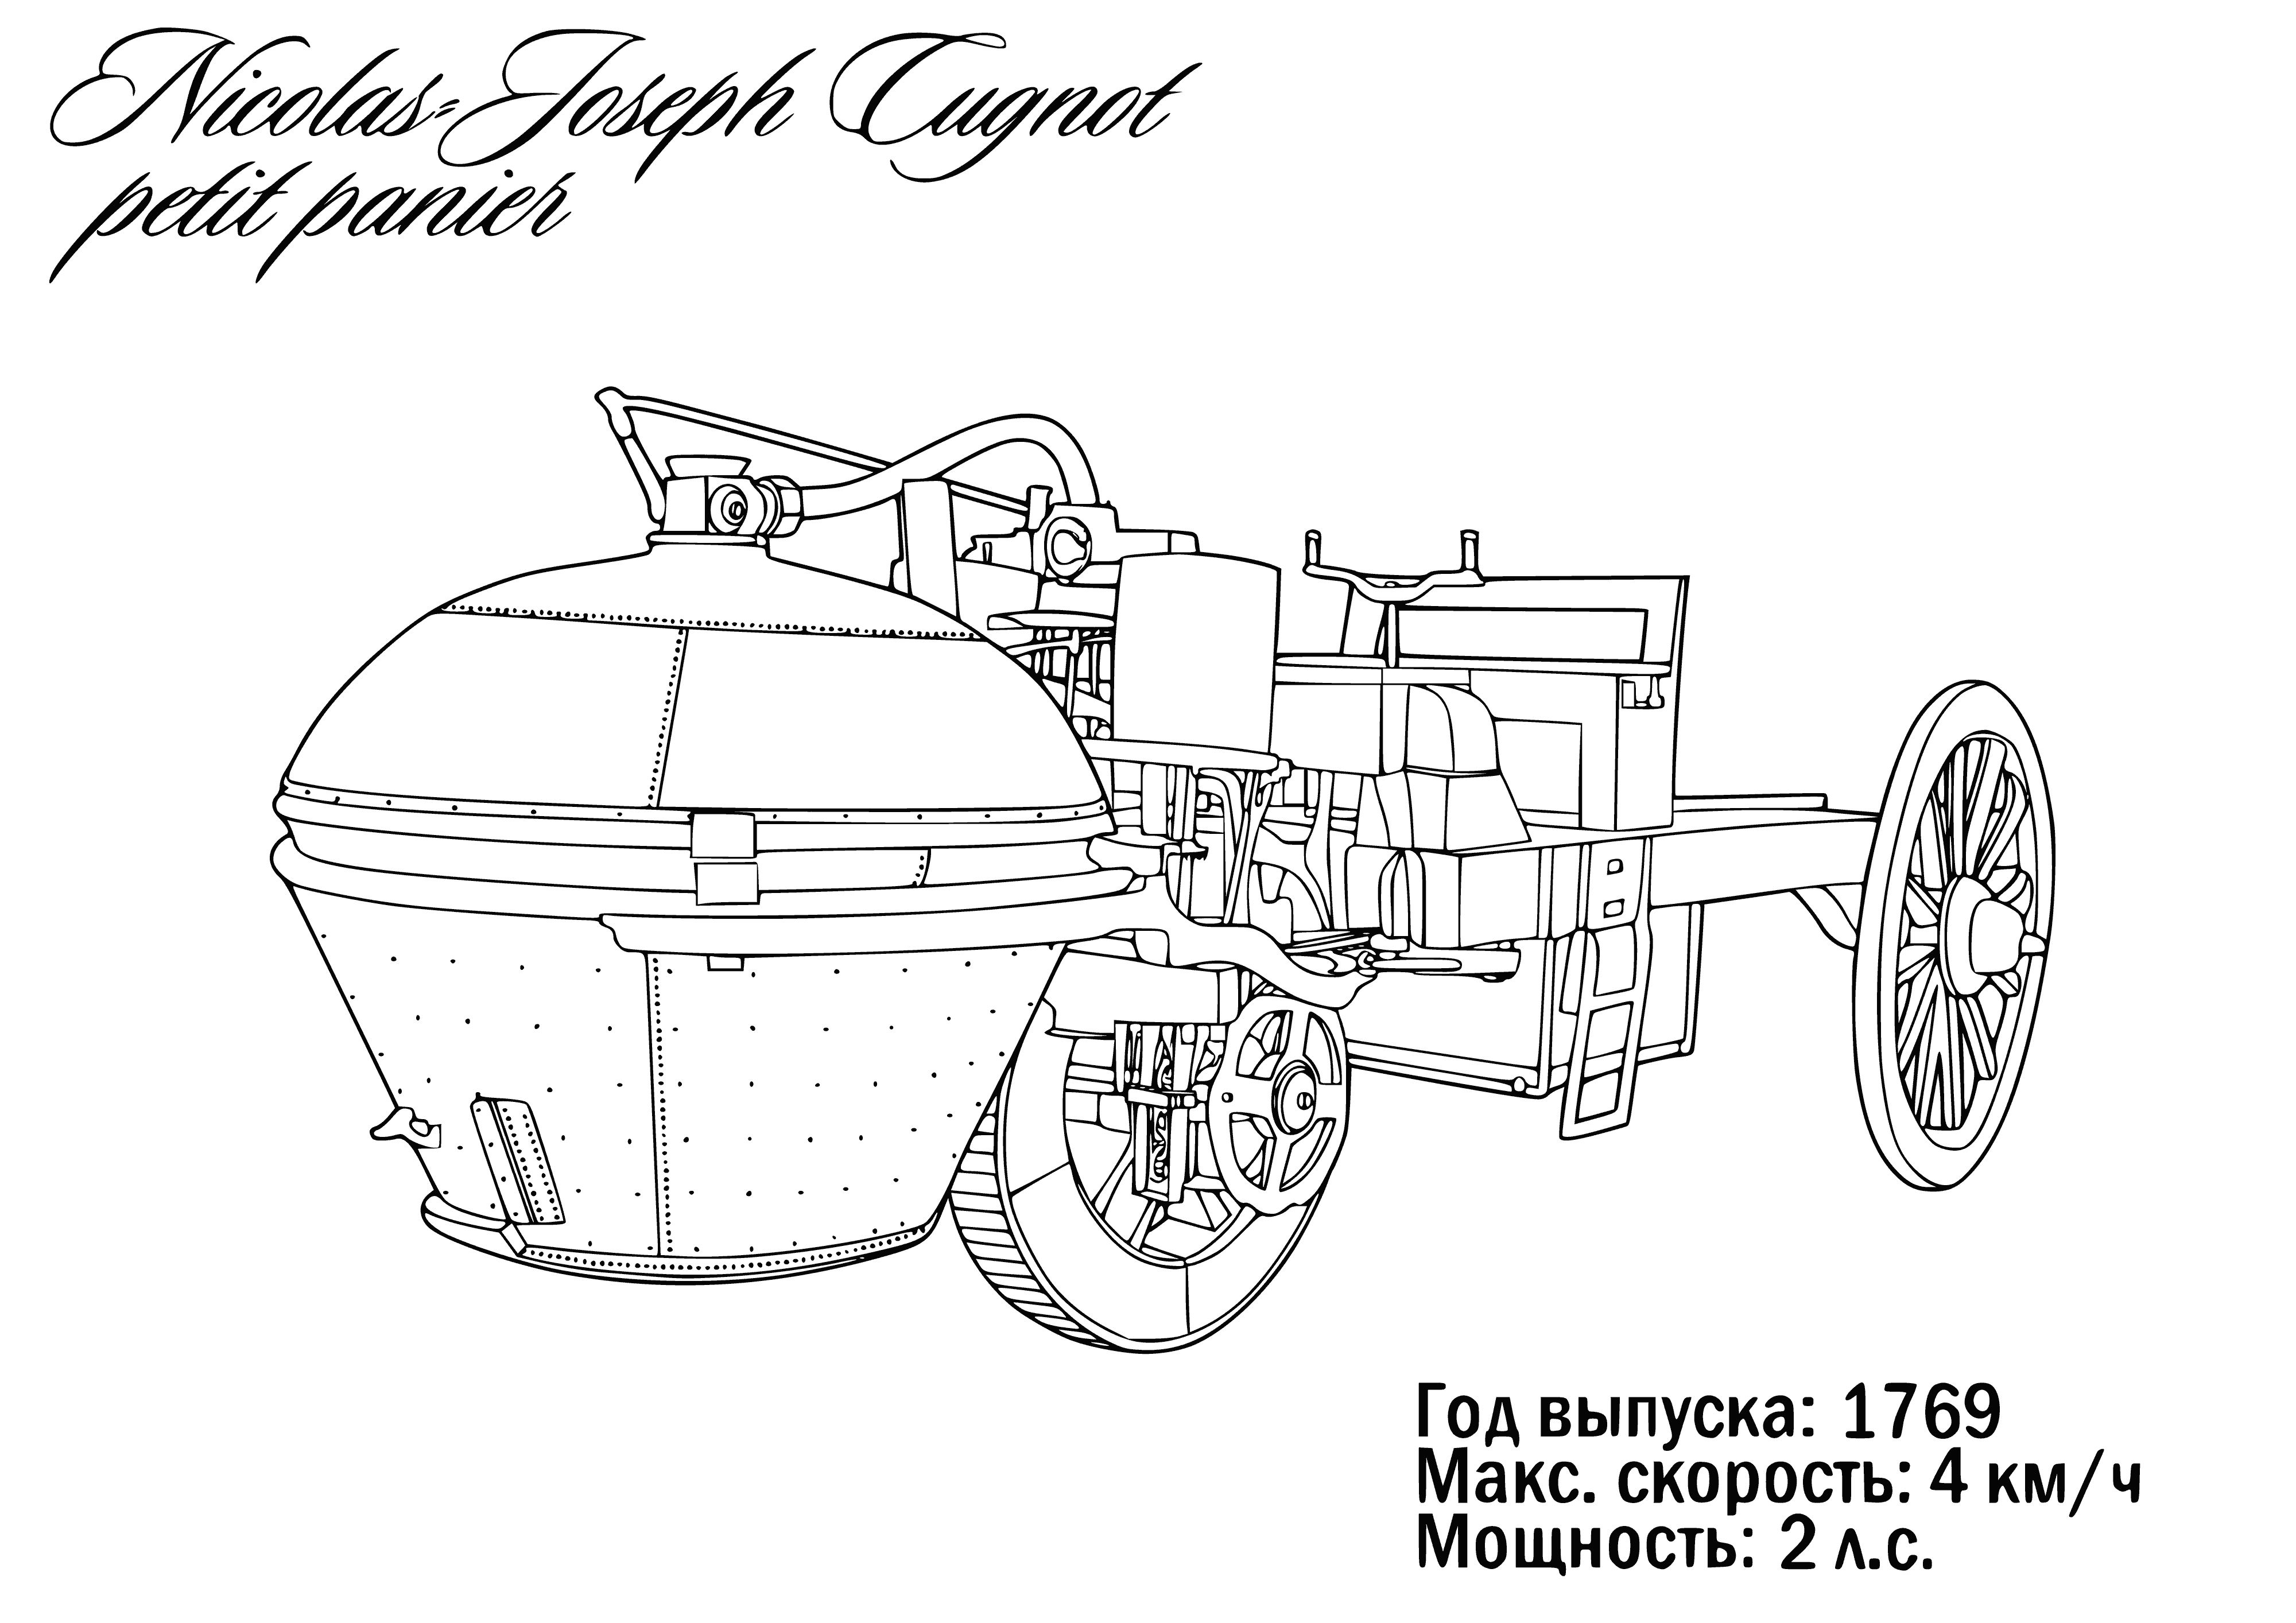 The first self-propelled vehicle coloring page